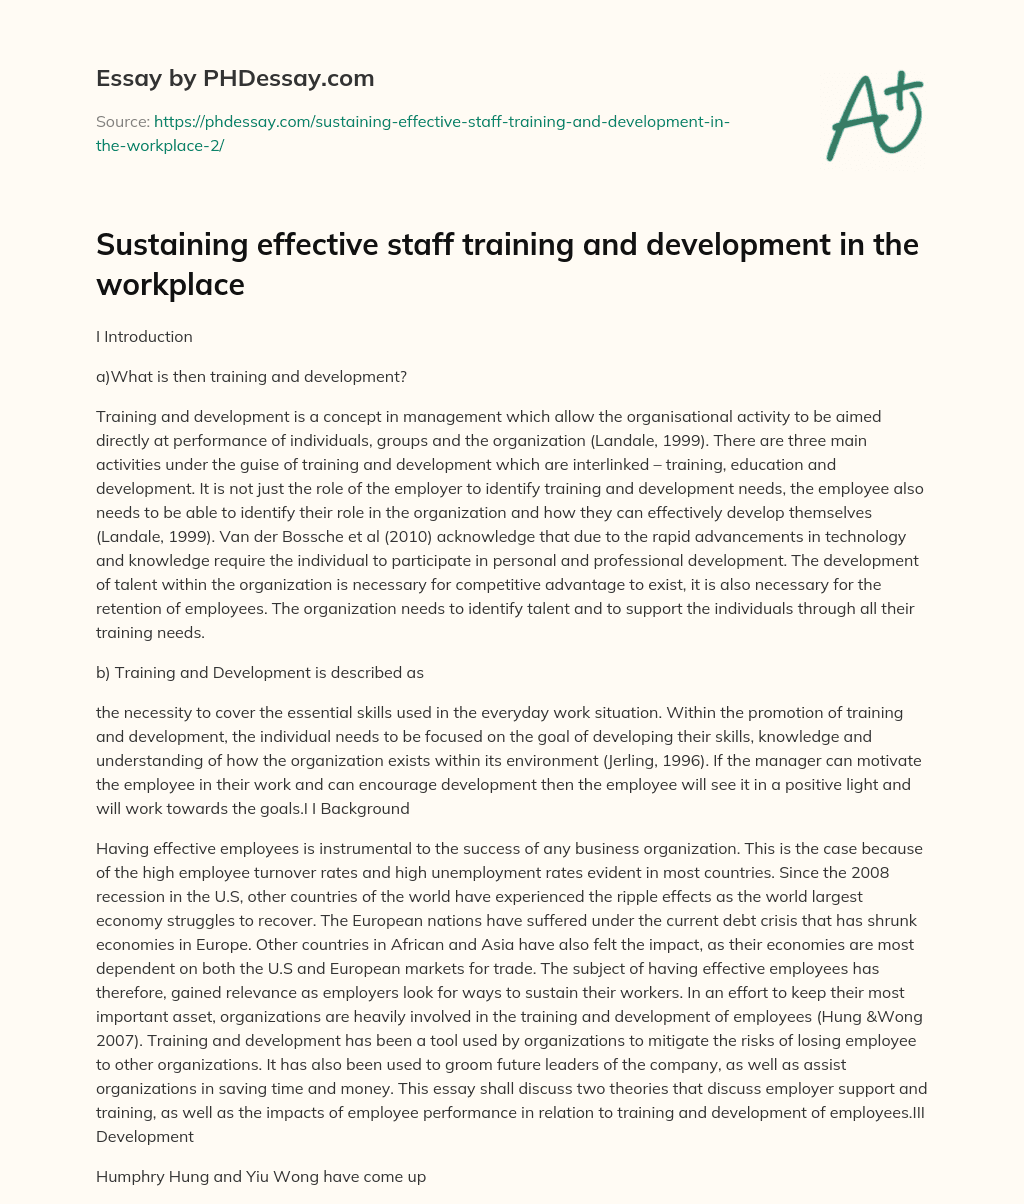 Sustaining effective staff training and development in the workplace essay